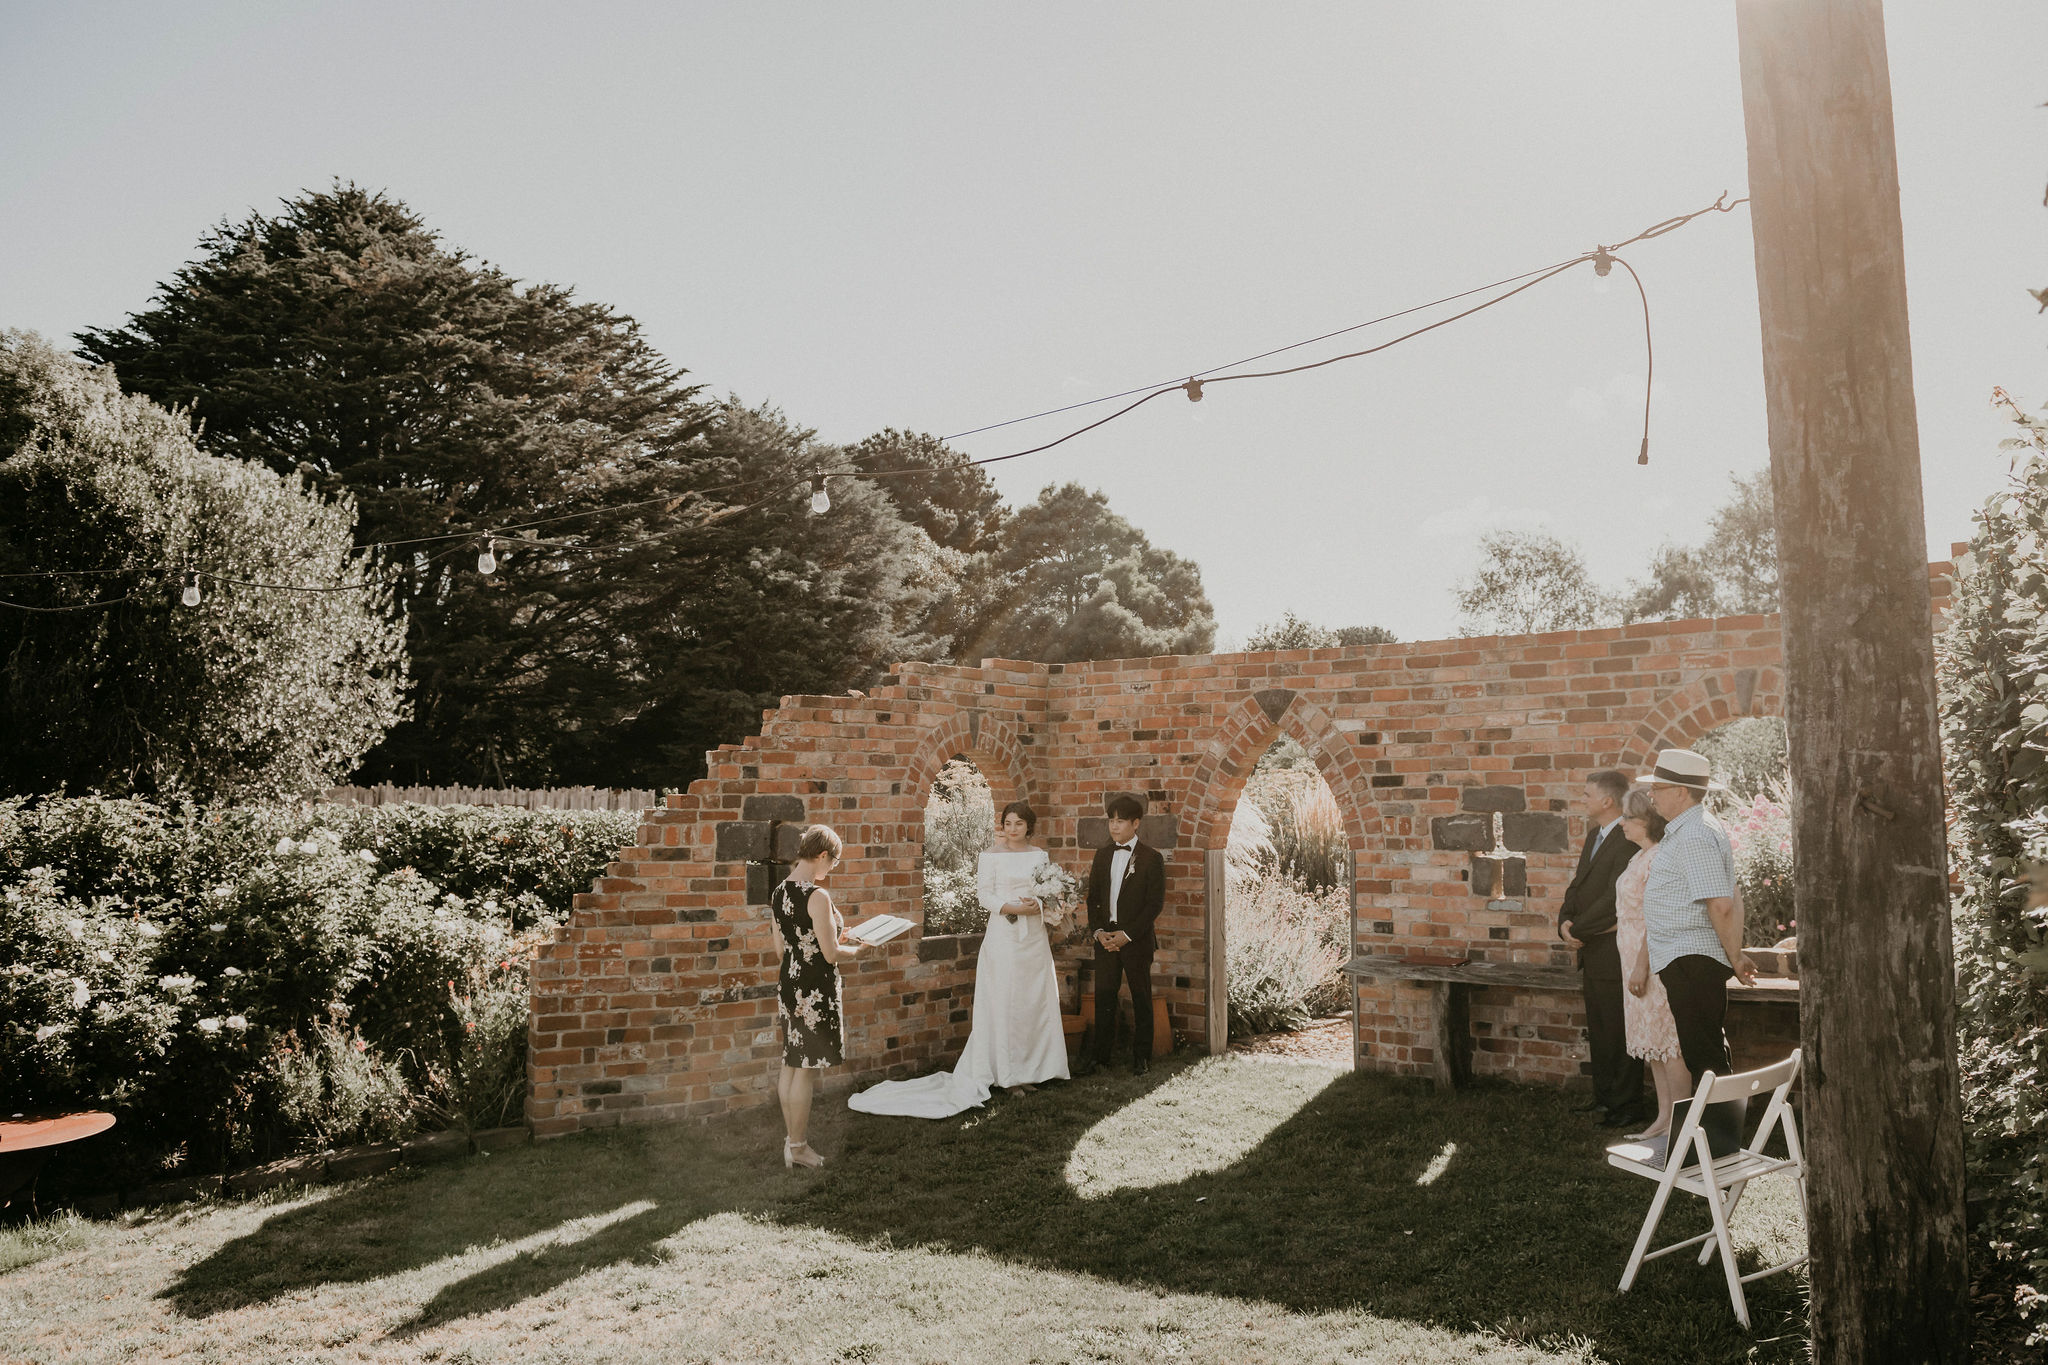 Ceremony takes place by the brick folly bathed in afternoon sunlight with close family Let's Elope Melbourne Portfolio Celebrant Photographer Elopement Packages Victoria Sarah Matler Photography intimate weddings Acre of Roses Trentham romantic ceremony